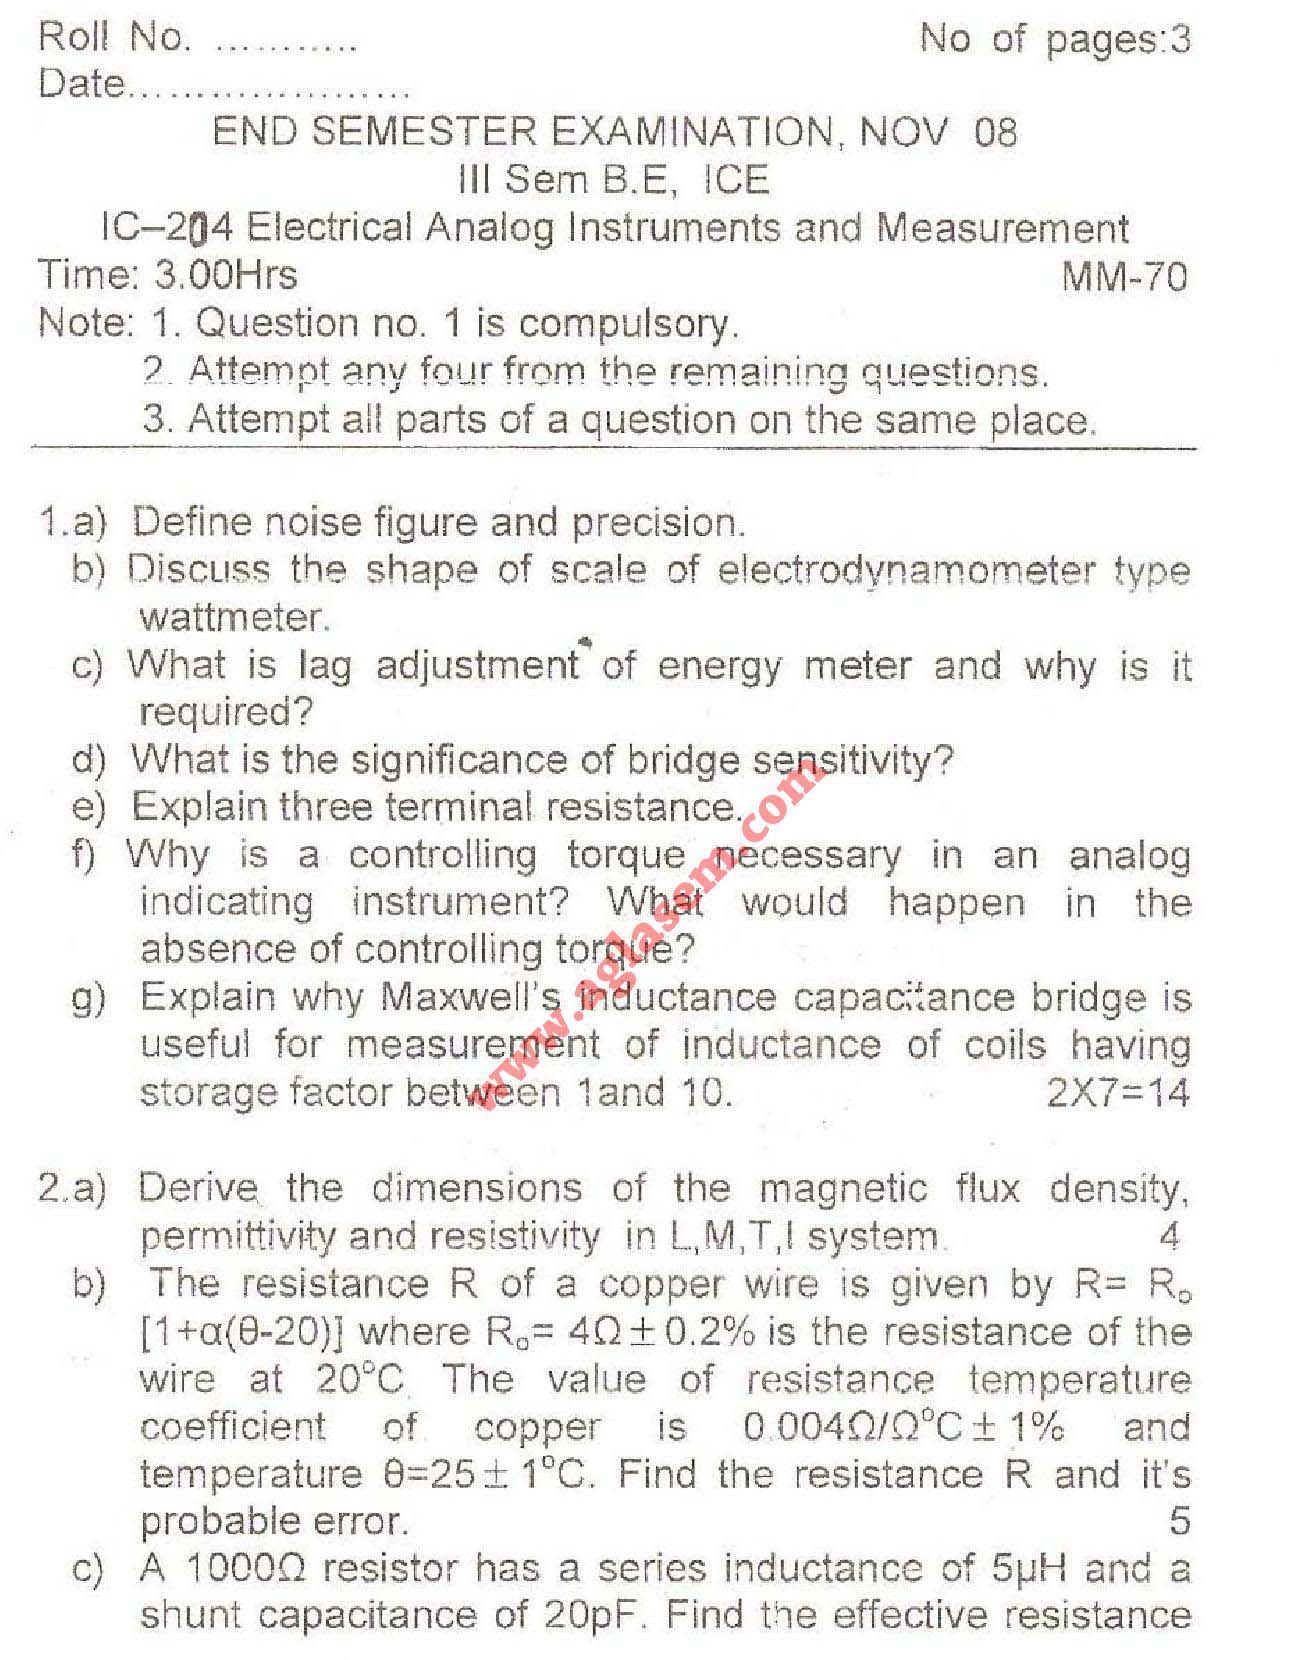 NSIT Question Papers 2008  3 Semester - End Sem - IC-204